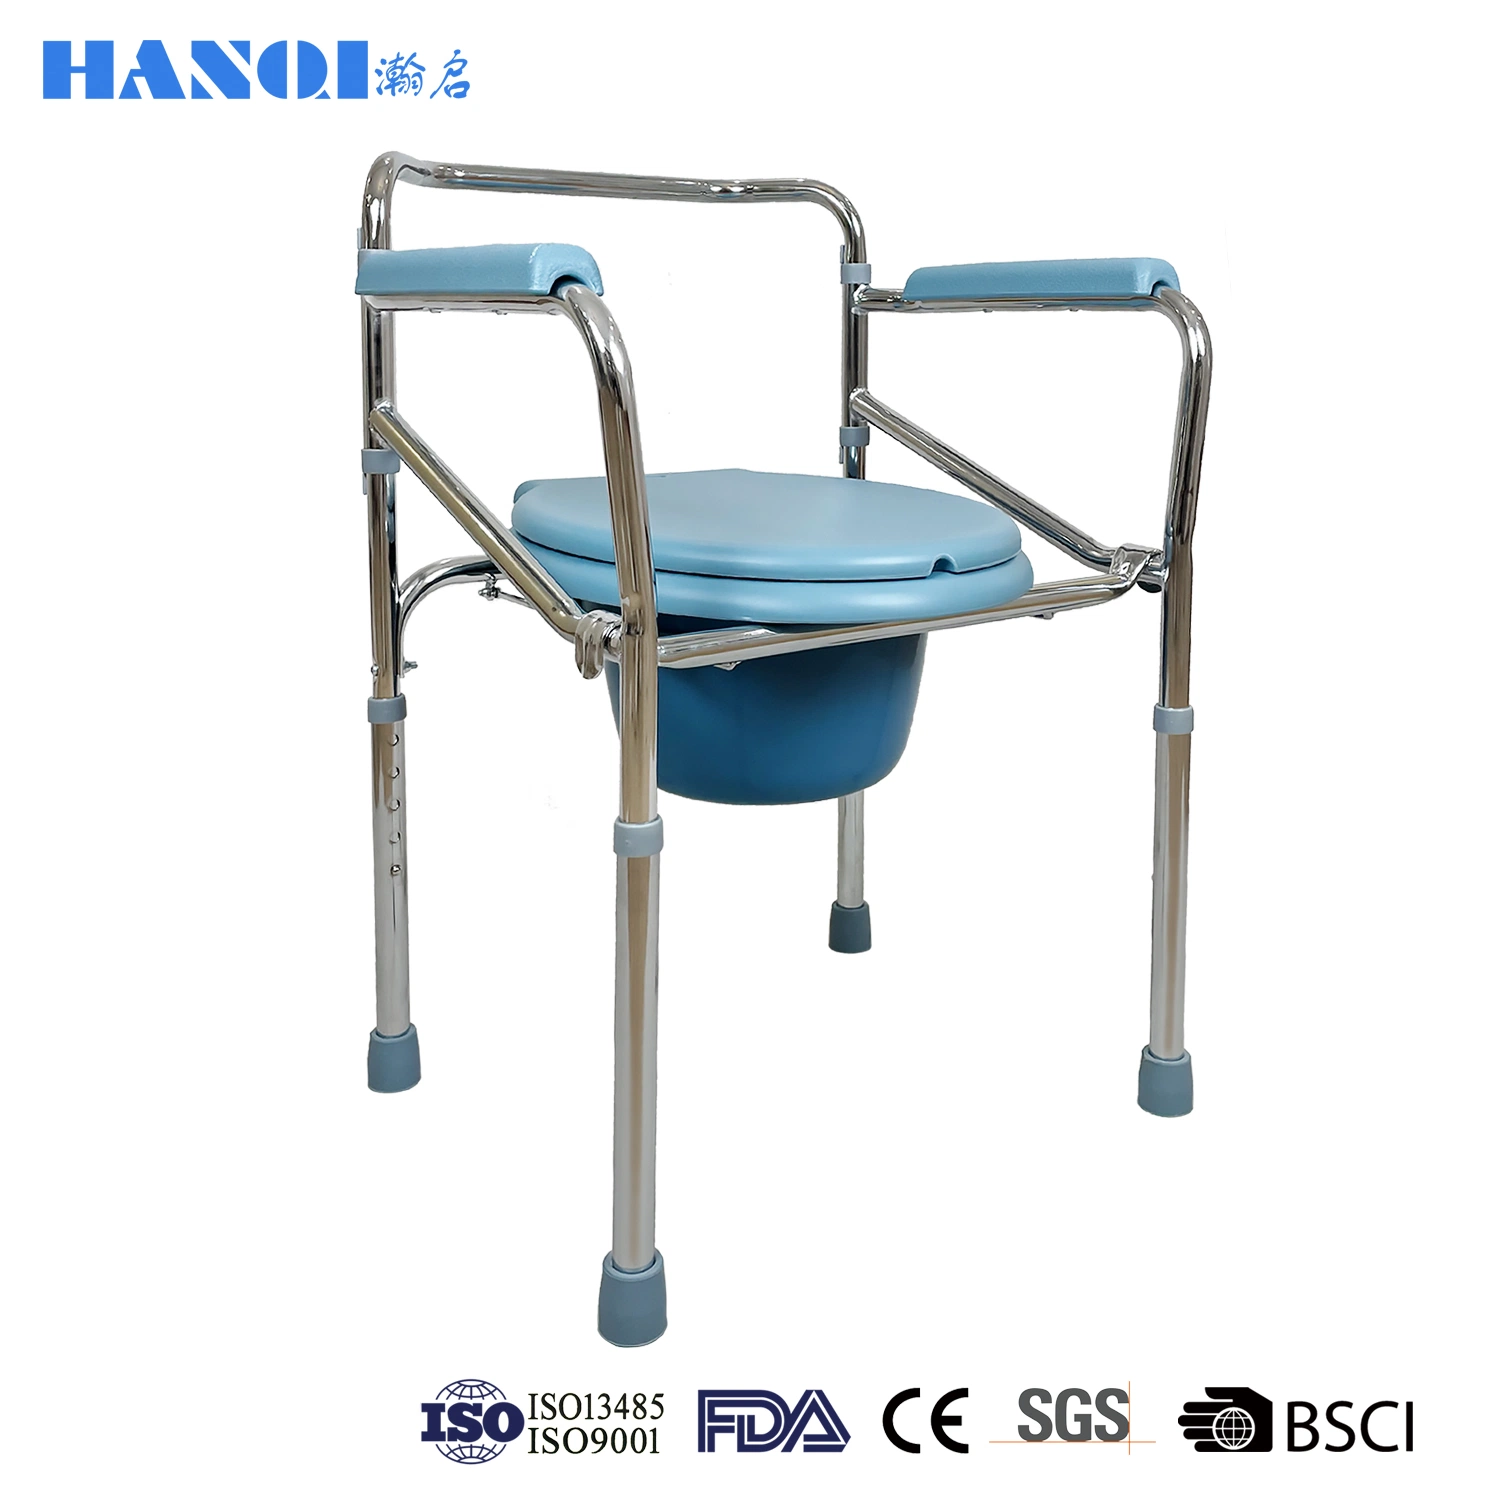 Economical Portable Steel Toilet Commode Chair with Waterproof Seat Non-Slip Potty Chair